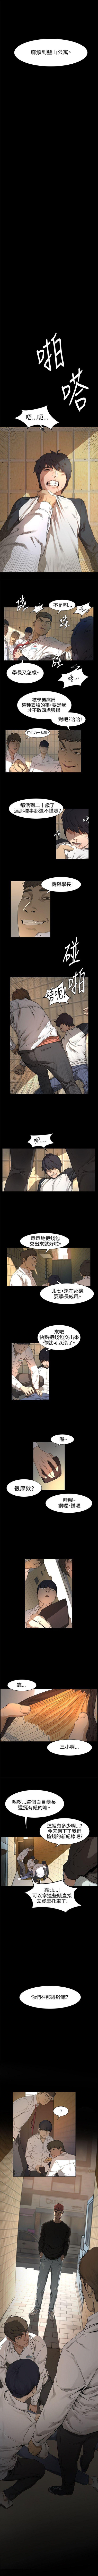 Lovers 衝突 1-116 官方中文（連載中） Concha - Page 5